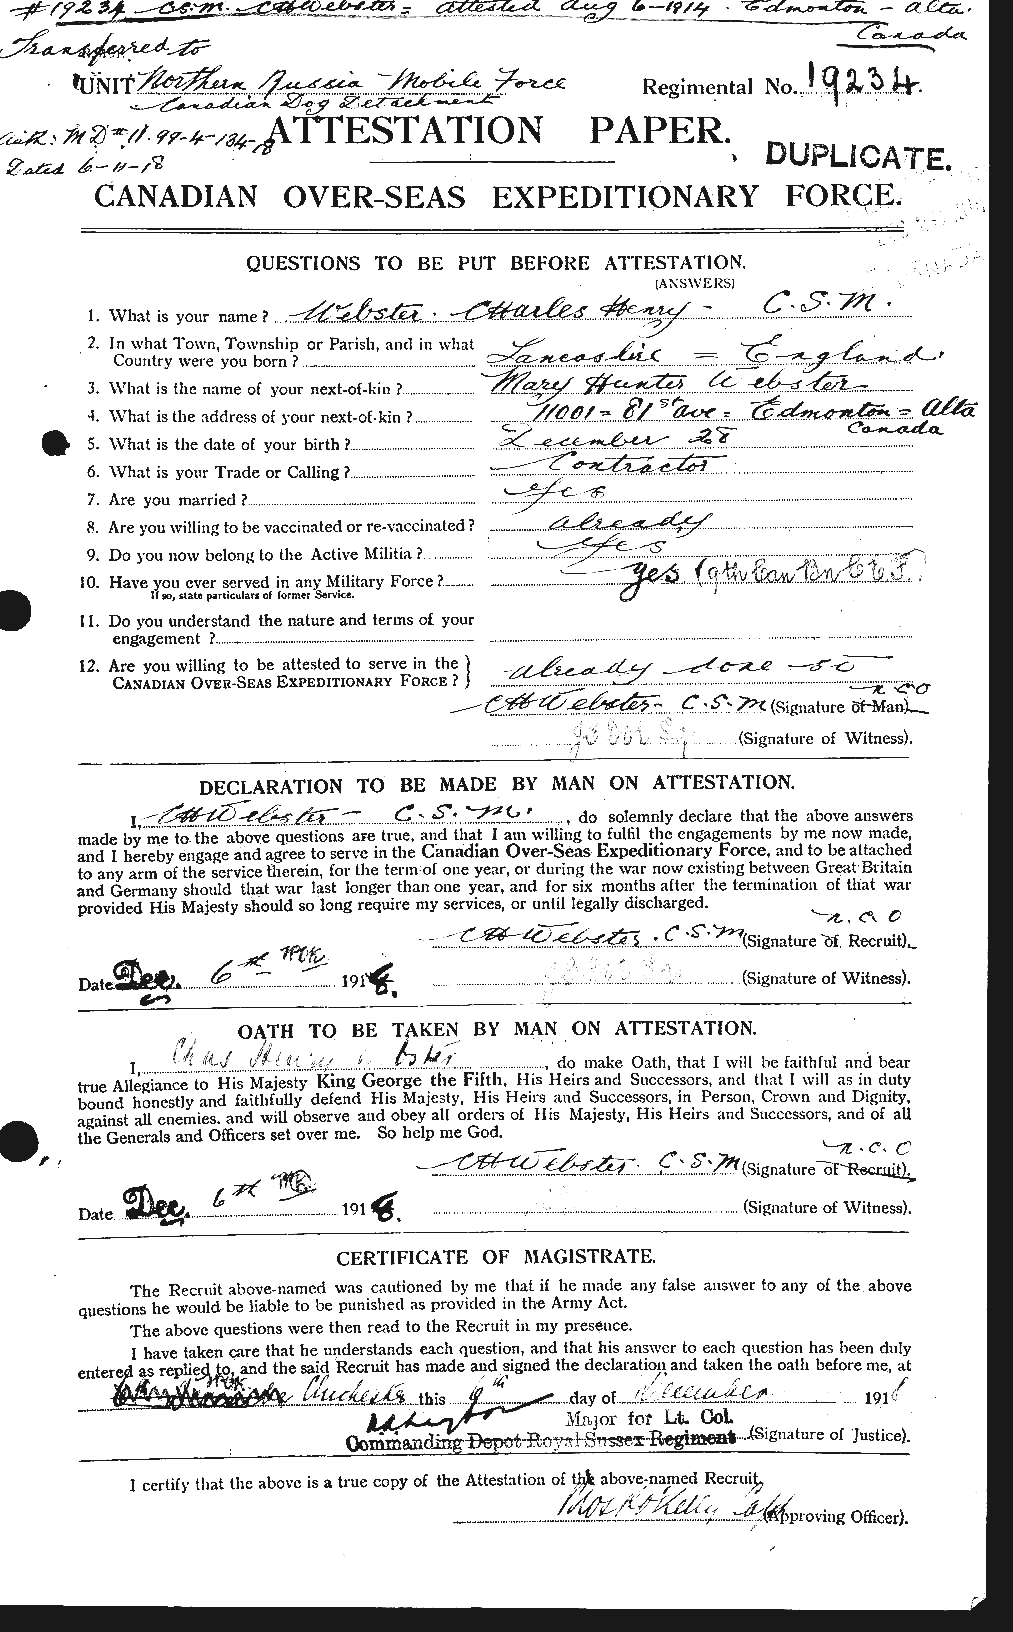 Personnel Records of the First World War - CEF 670297a